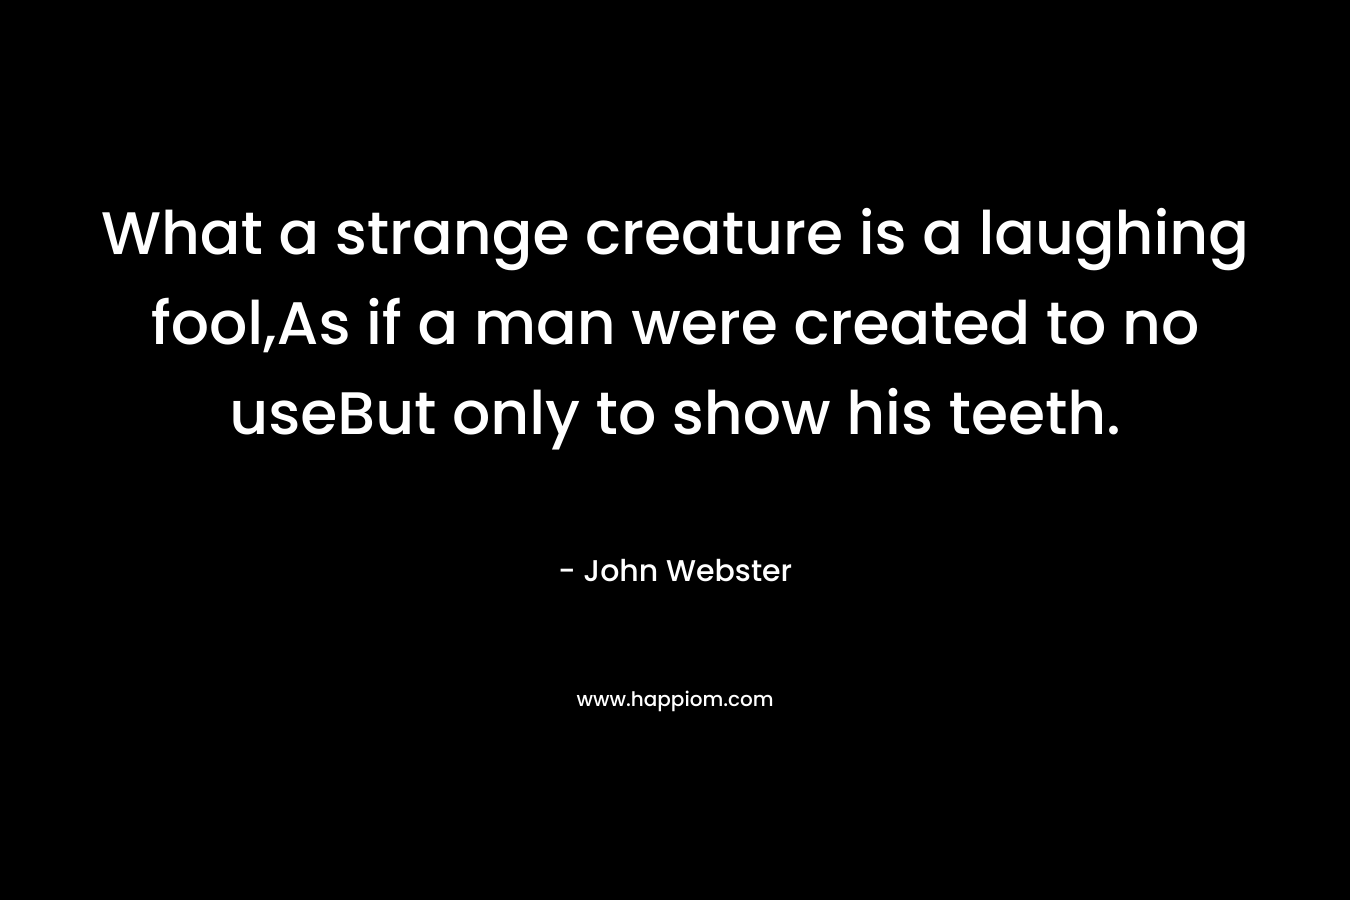 What a strange creature is a laughing fool,As if a man were created to no useBut only to show his teeth. – John Webster